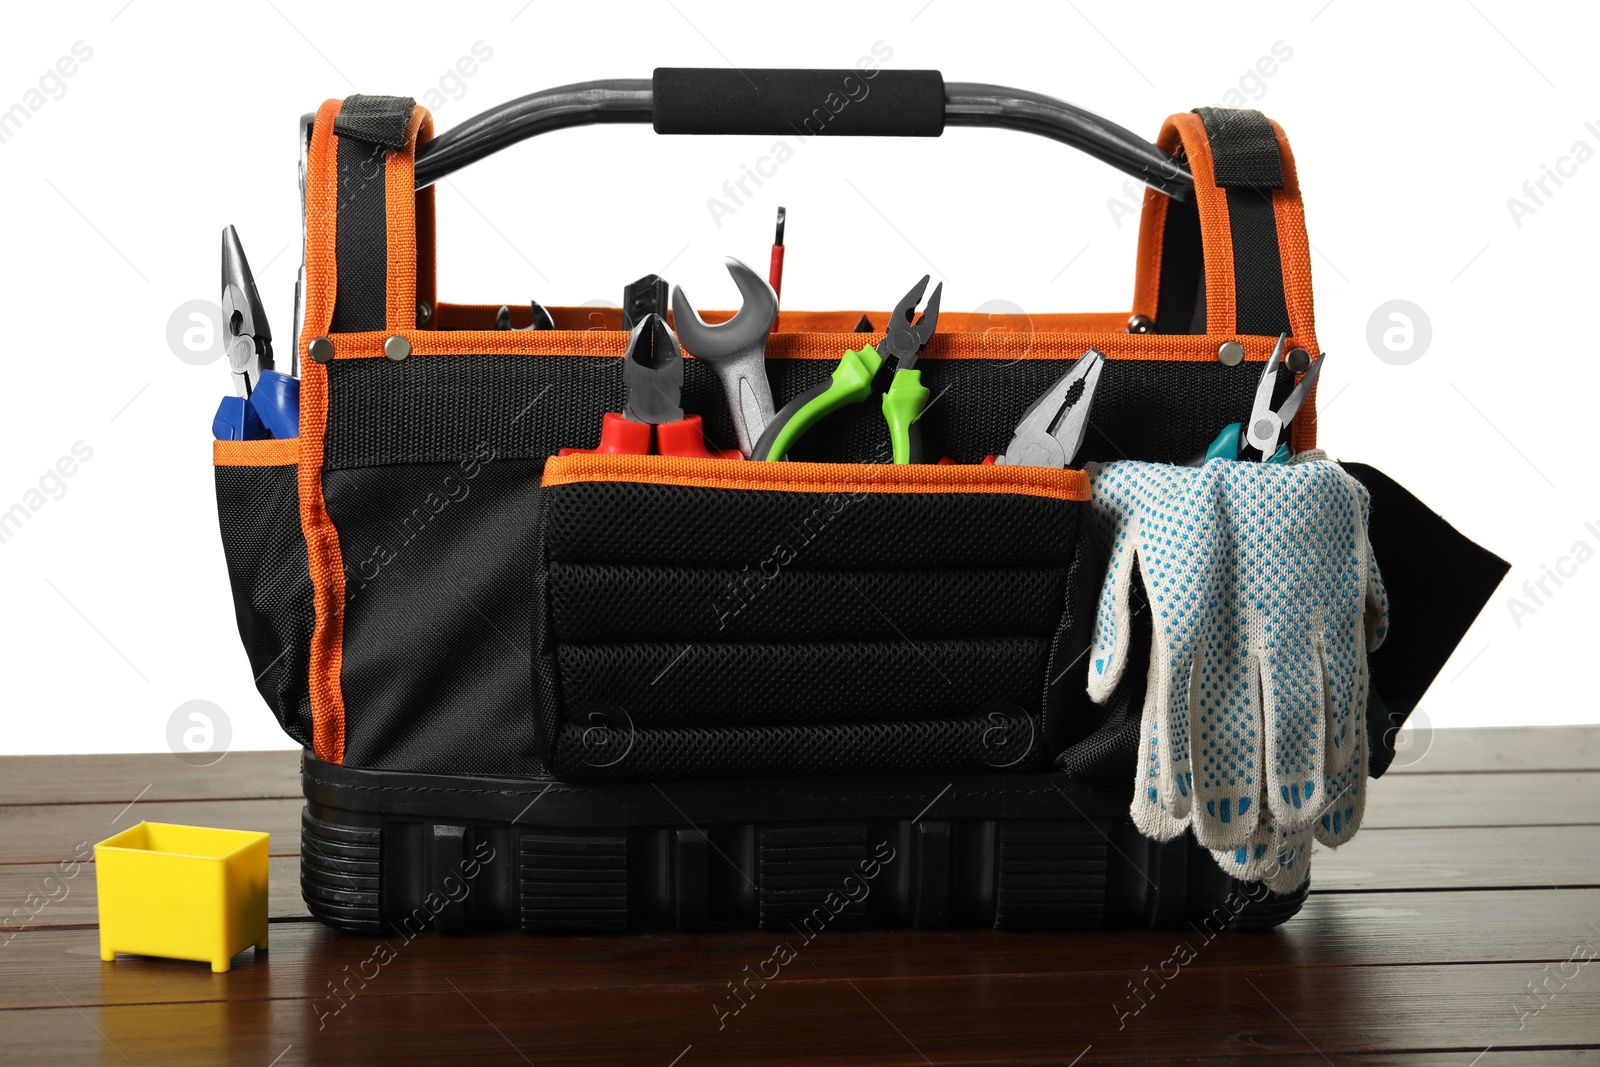 Photo of Tool bag with different pliers, work gloves and wrench on wooden table against white background